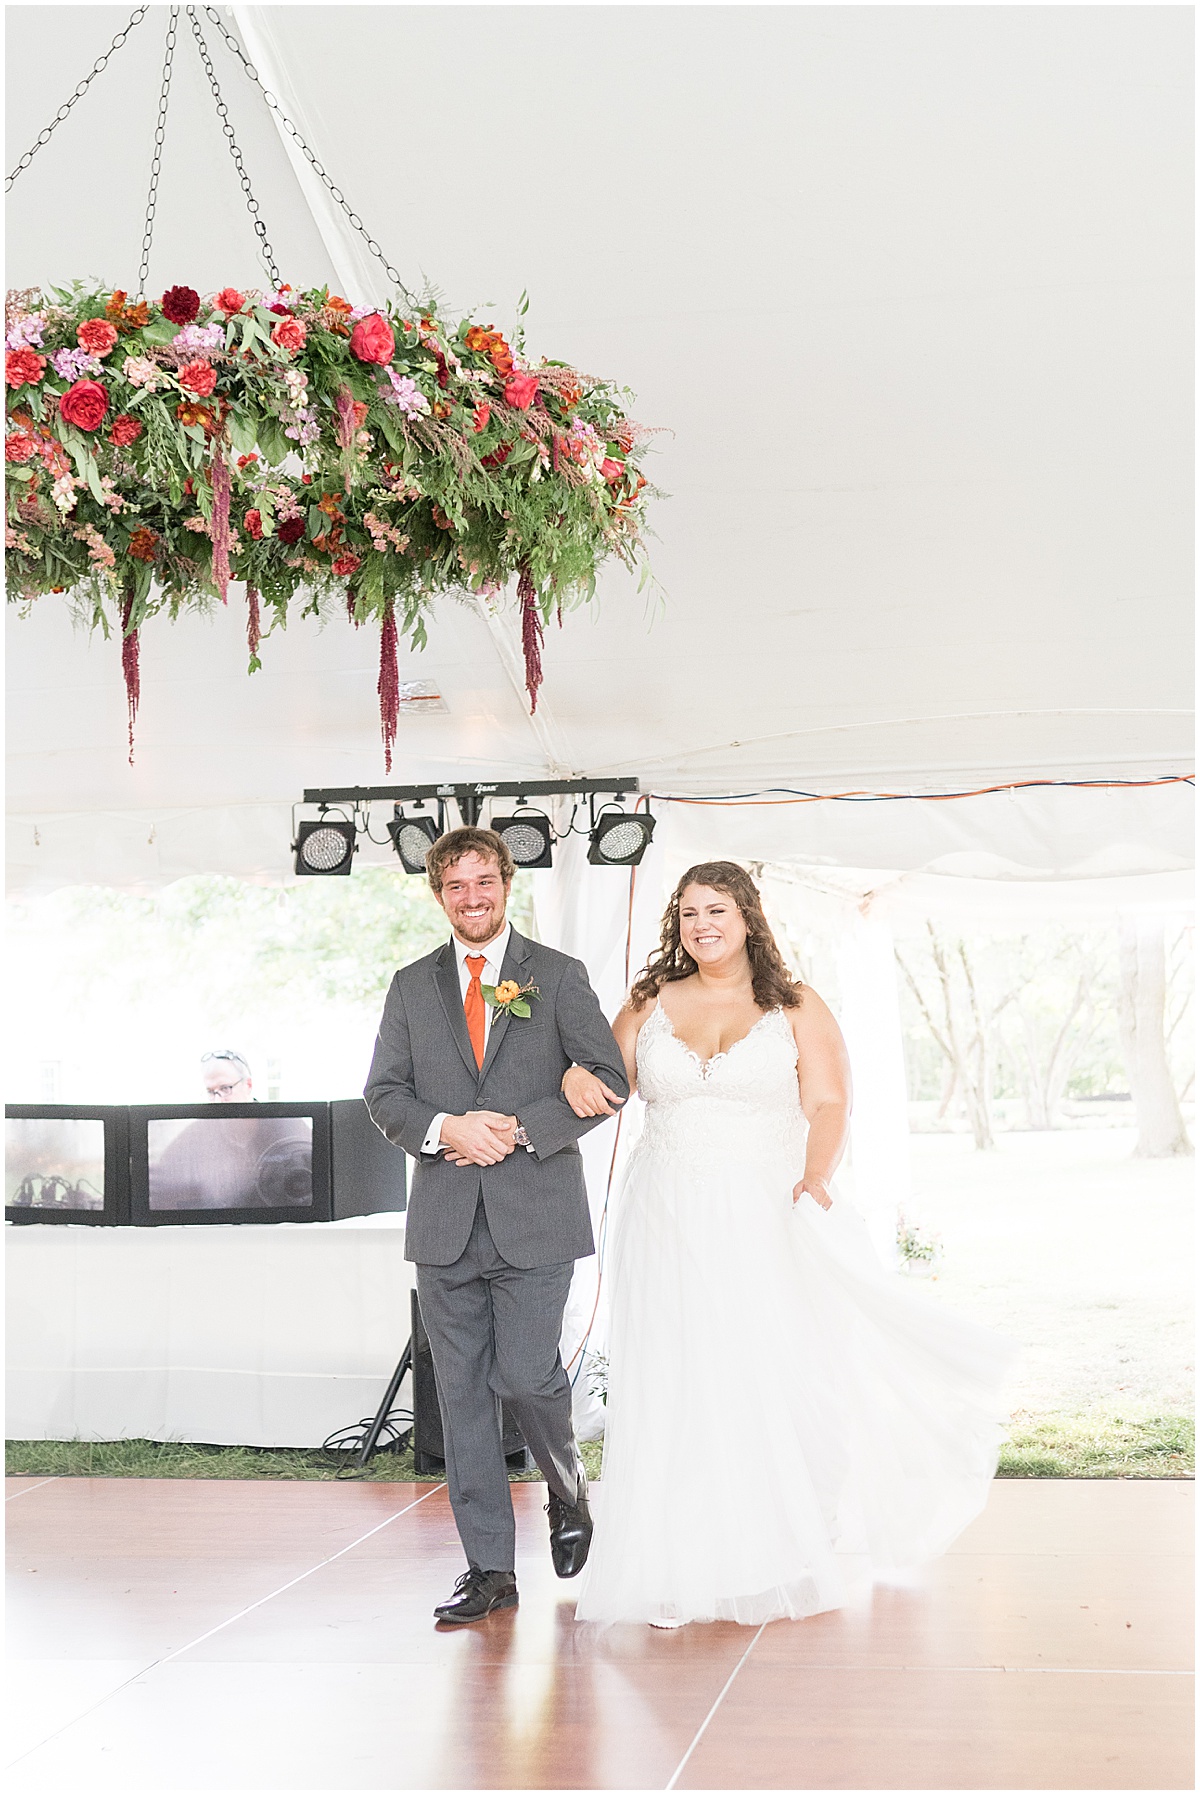 Entrance of outdoor private property wedding in Frankfort, Indiana by Victoria Rayburn Photography